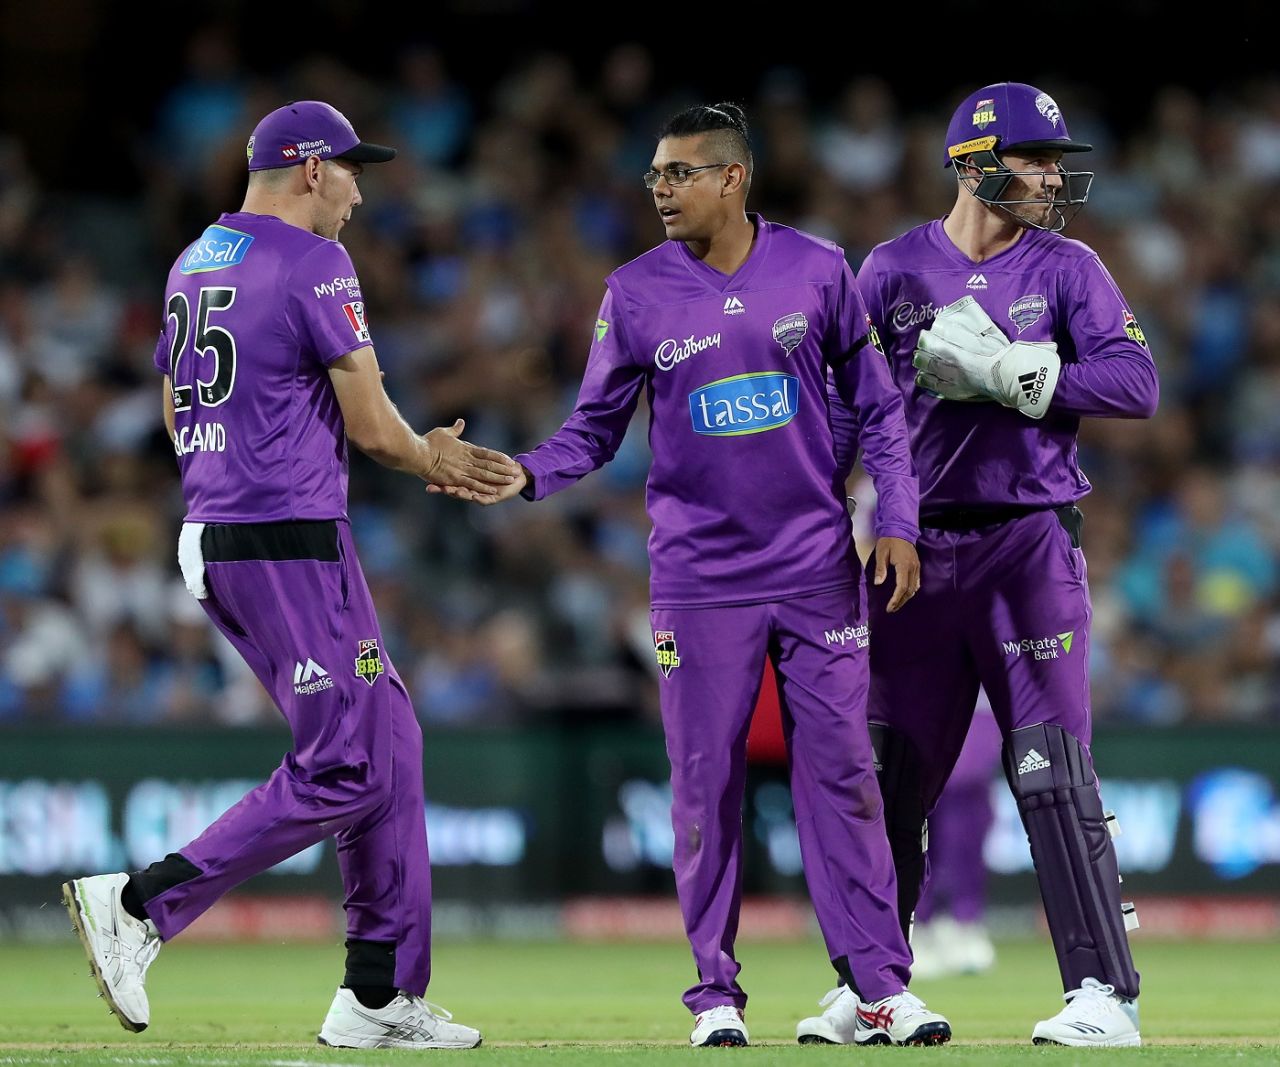 Clive Rose bowled two overs, and got a wicket in each of them, Adelaide Strikers v Hobart Hurricanes, Big Bash League 2019-20, Adelaide, January 26, 2020